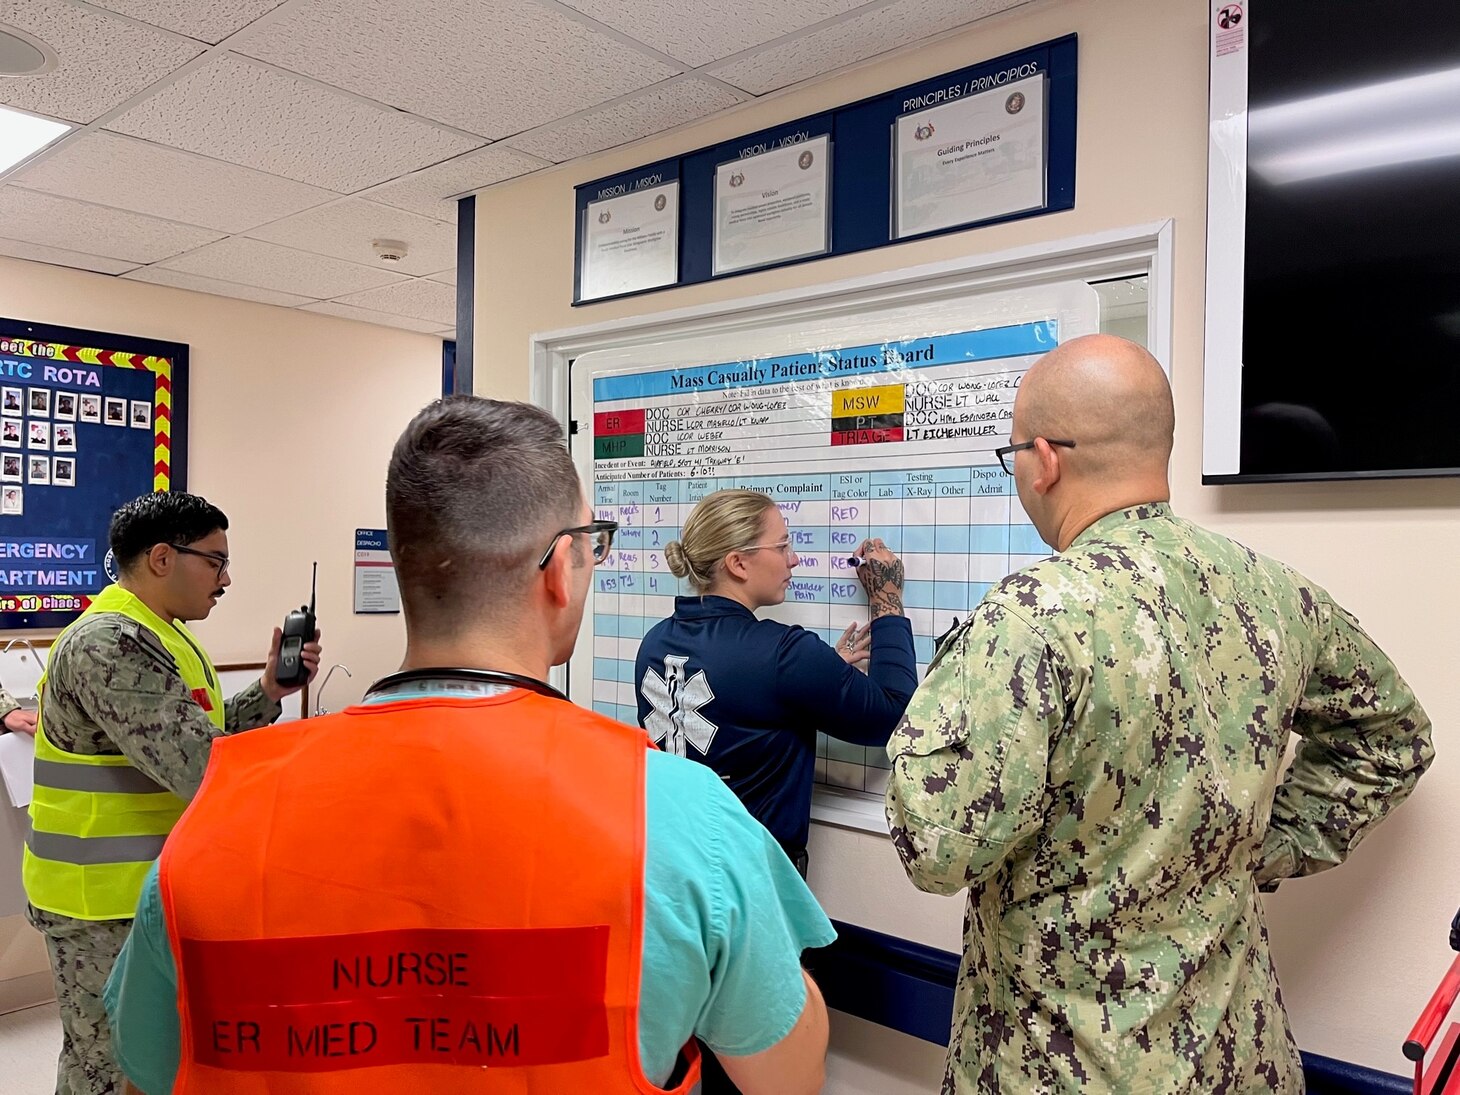 Lieutenant Commander Andrew Masiello (Staten Island, NY) and Hospital Corpsman Third Class Rebekah Chute (Woodlands, TX) update the mass casualty board to ensure the care team stays informed on patient care needs and location, during a mass casualty drill at Navy Medicine Readiness and Training Command on August 22, 2023.  Naval Hospital Rota is a forward deployed ready medical treatment facility protecting force health, sustaining medical readiness, and prepared to surge support for a major logistics base and joint tenants on demand by EUCOM, AFRICOM, and CENTCOM.